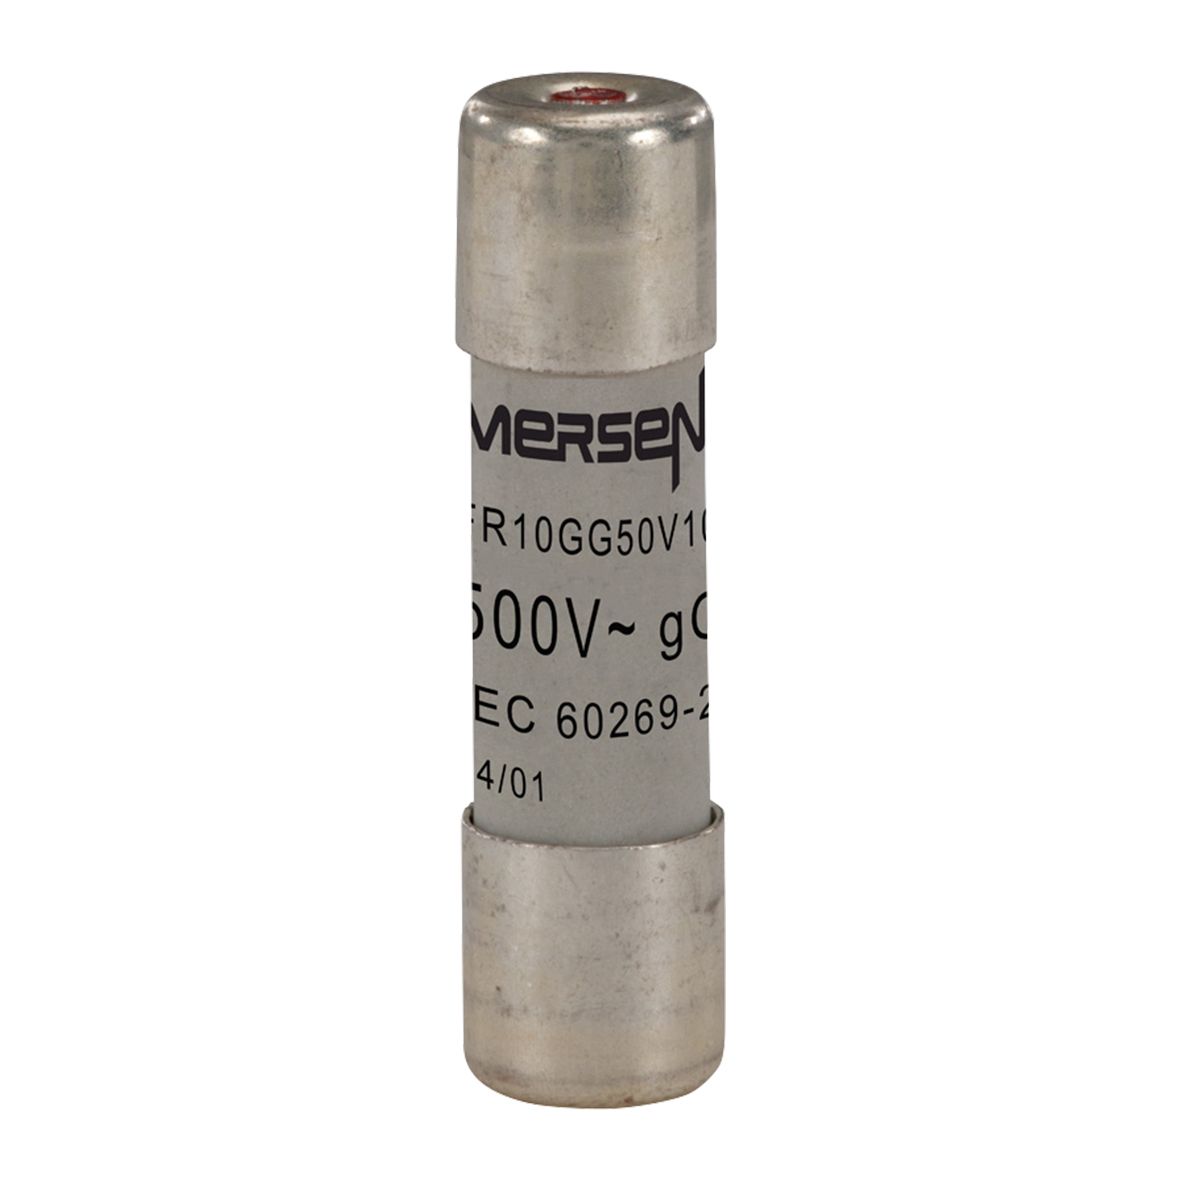 E222207 - Cylindrical fuse-link gG 500VAC 10.3x38, 10A with indicator